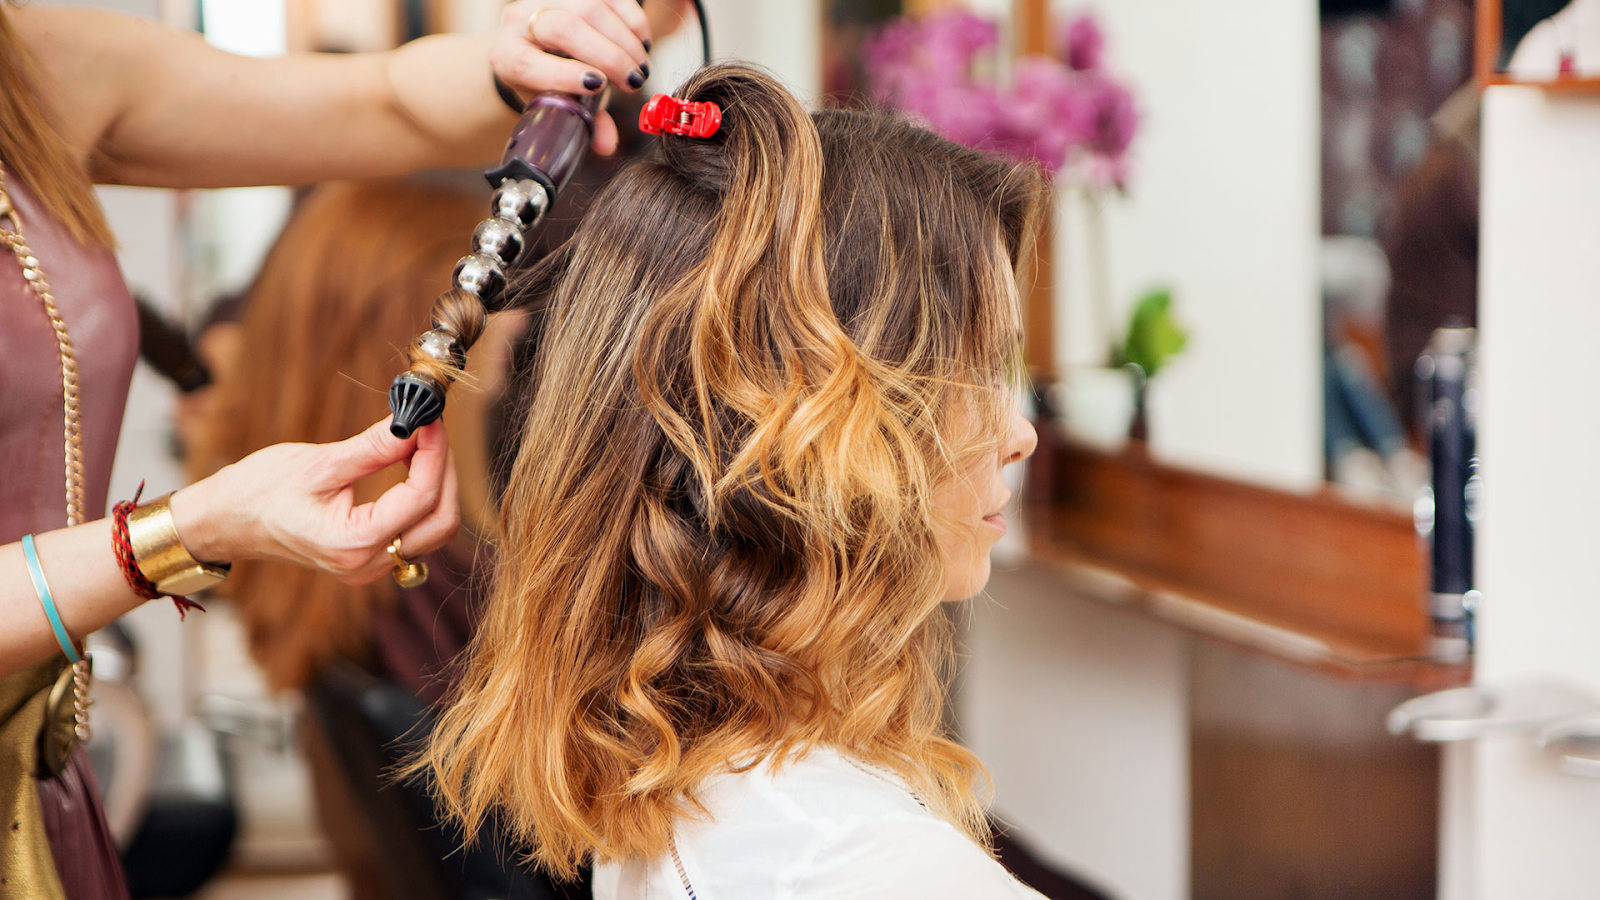 Hair stylists are experienced professionals who can provide a wide range of services, from simple haircuts to complex coloring and styling. A hair stylist must have up-to-date knowledge of the latest hairstyling trends and the necessary skills to create and maintain various looks. 
